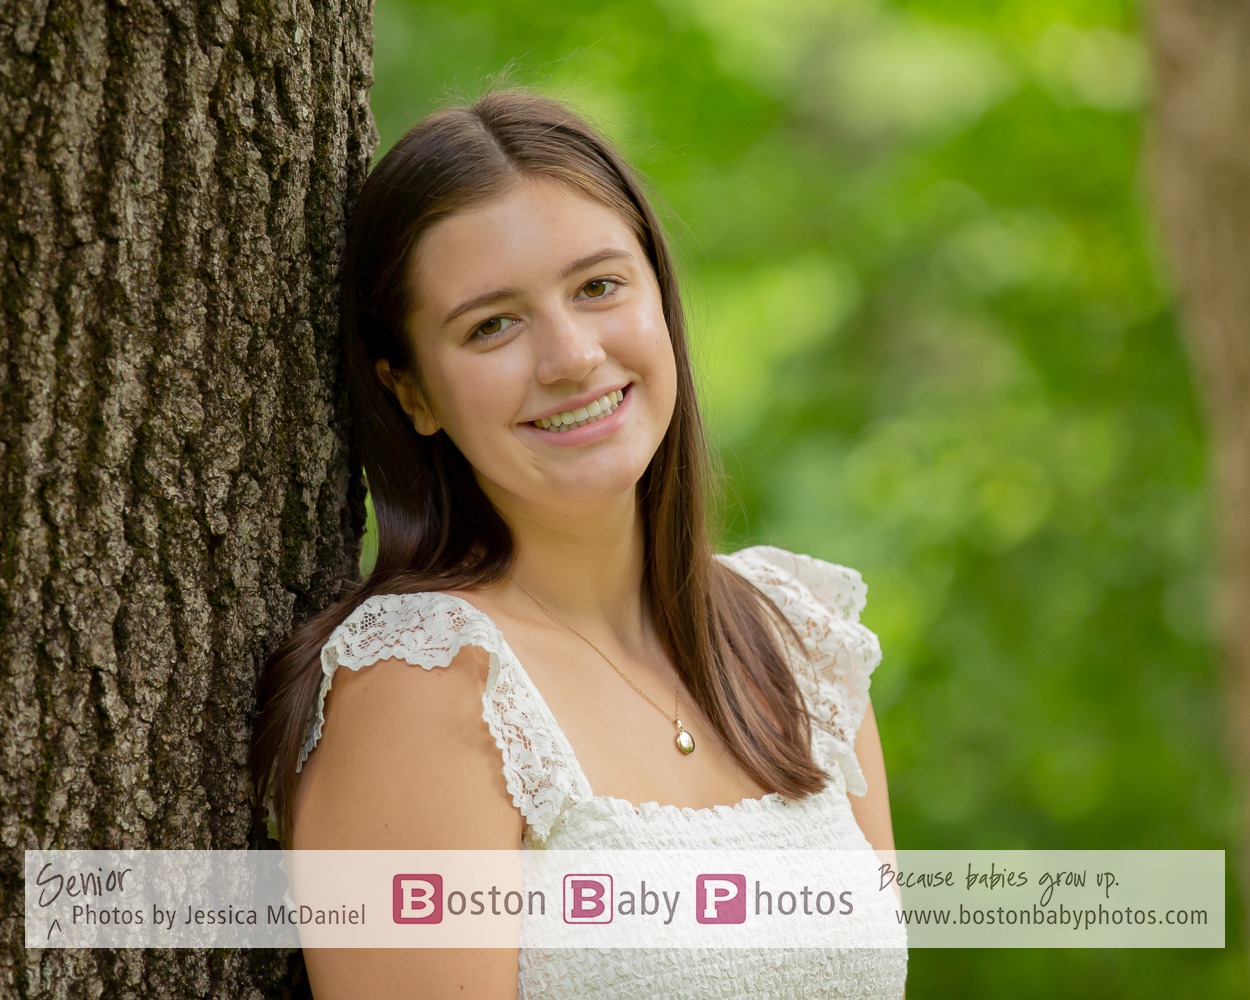 Westwood, MA: Senior Photos, sixteen years after the baby photoshoot